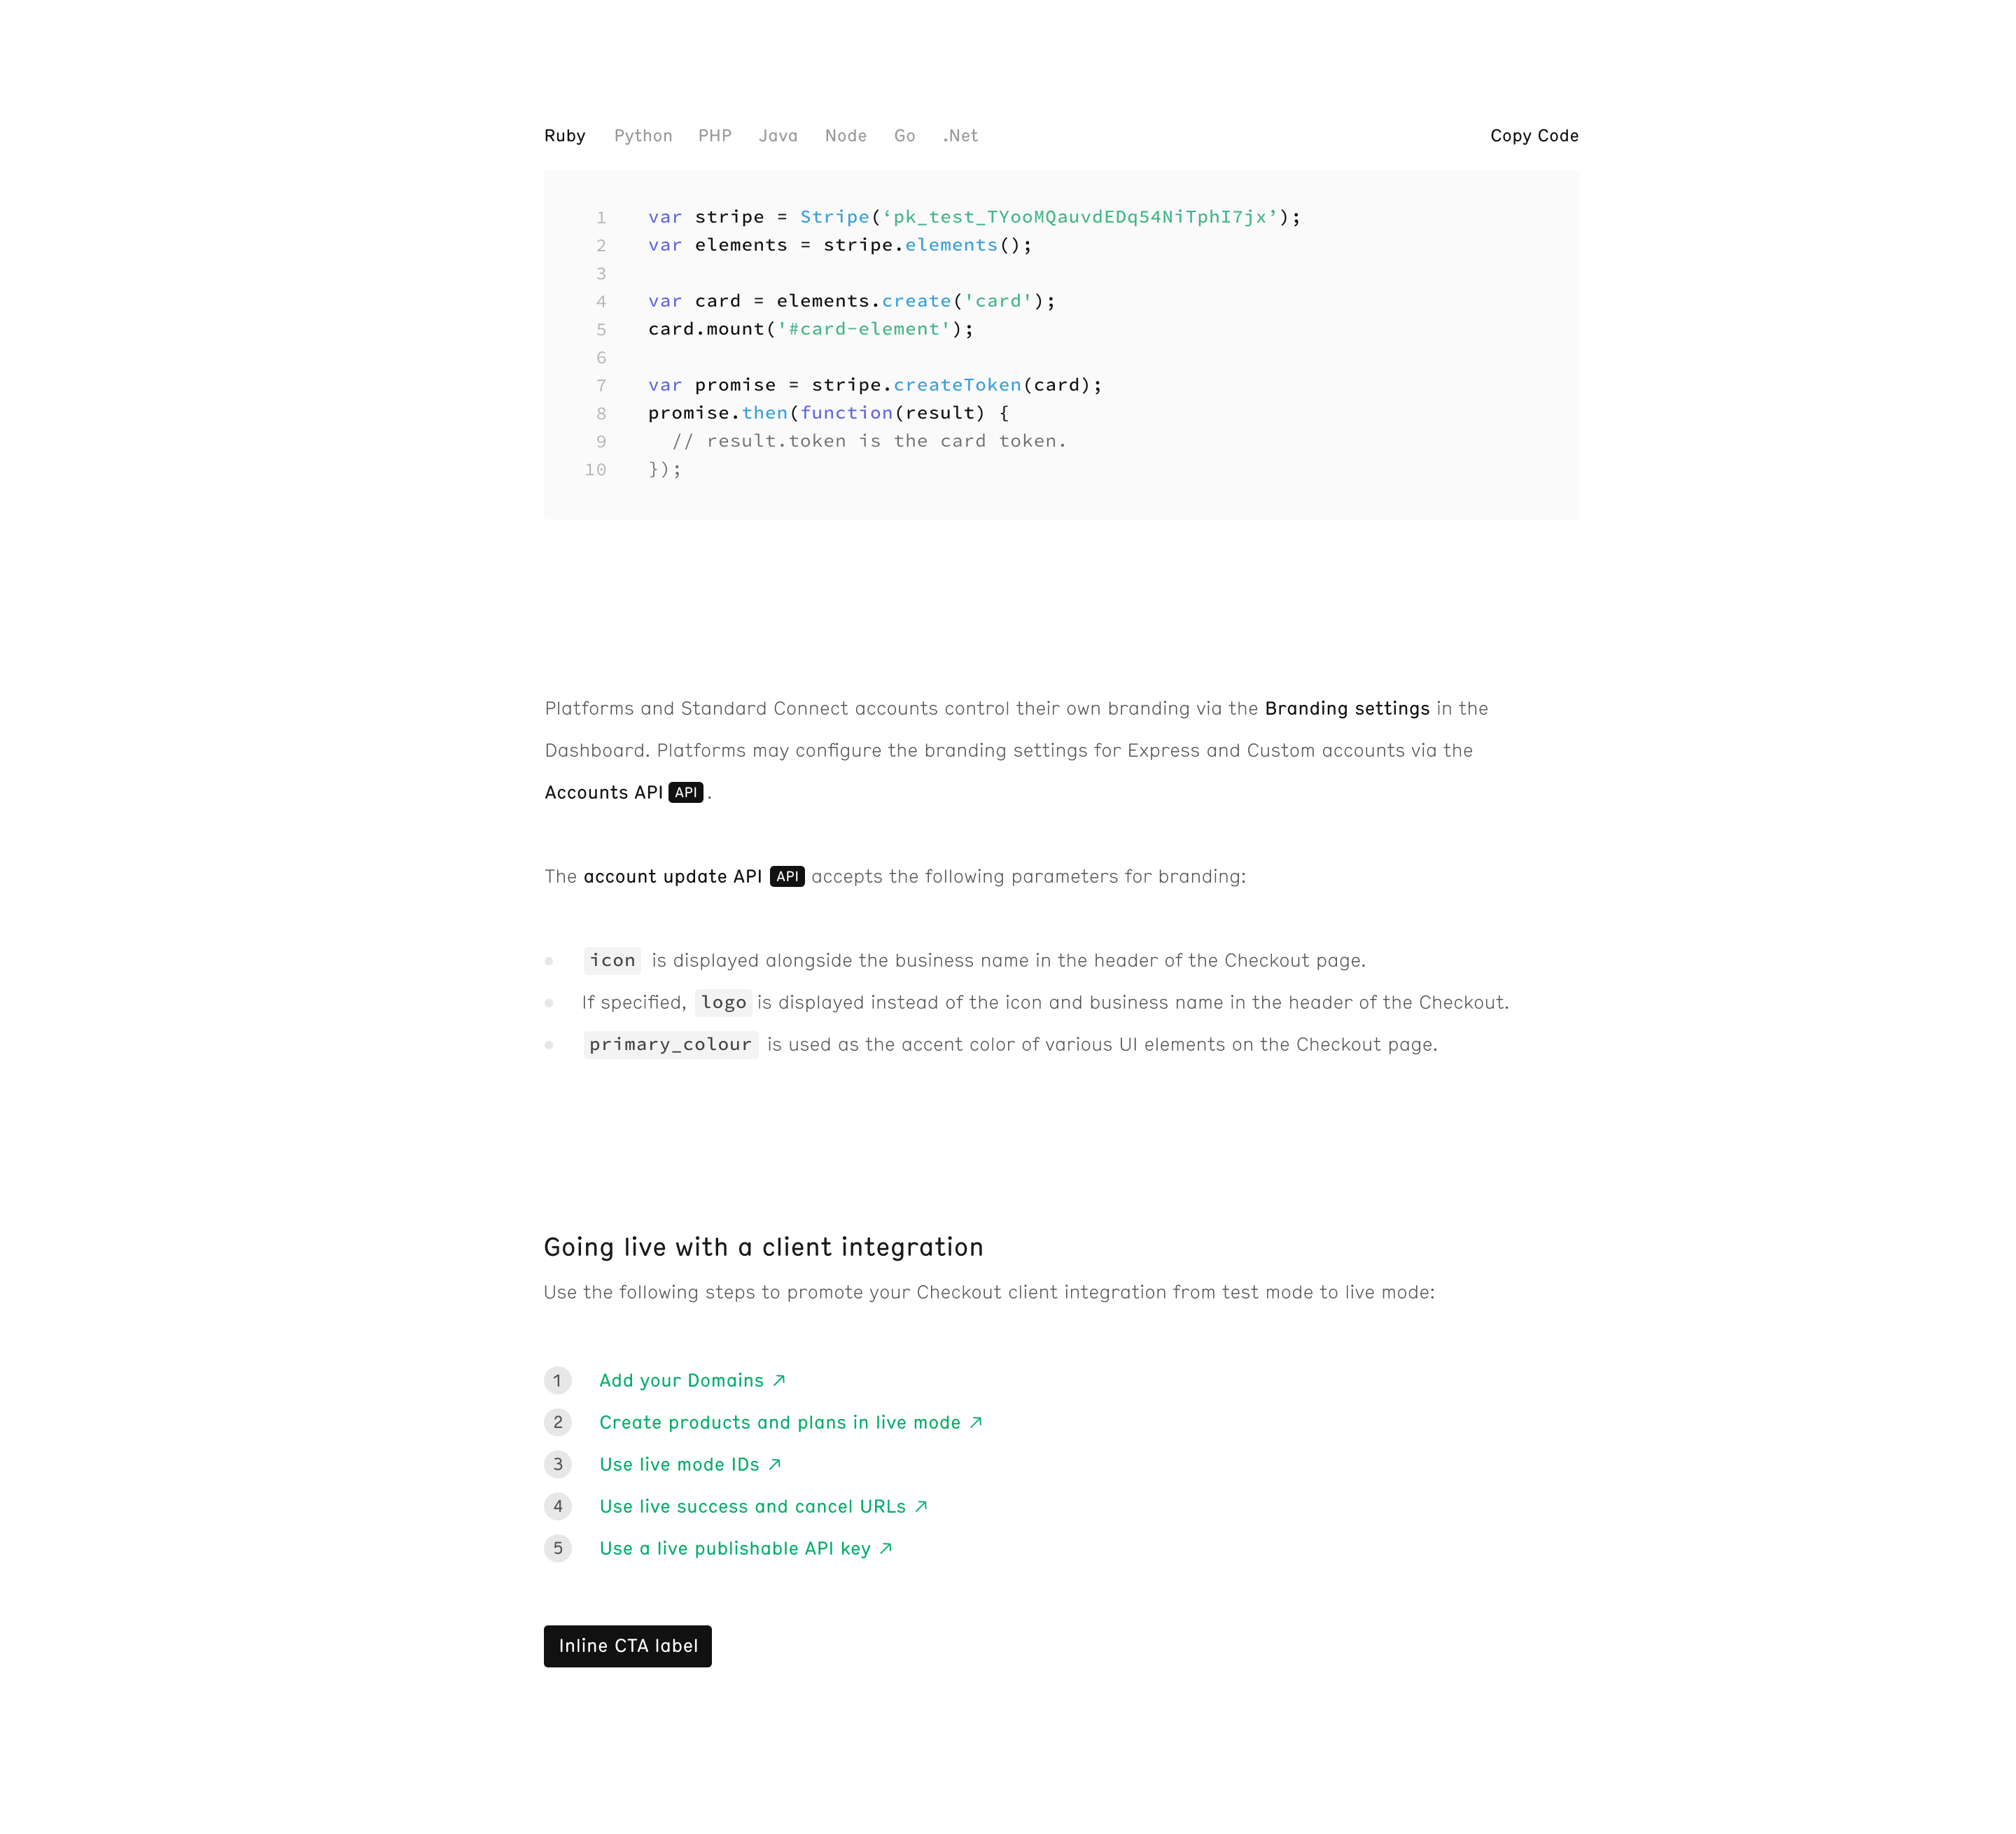 03BNK_CONSOLE_DOCUMENTATION_STYLES_ALL